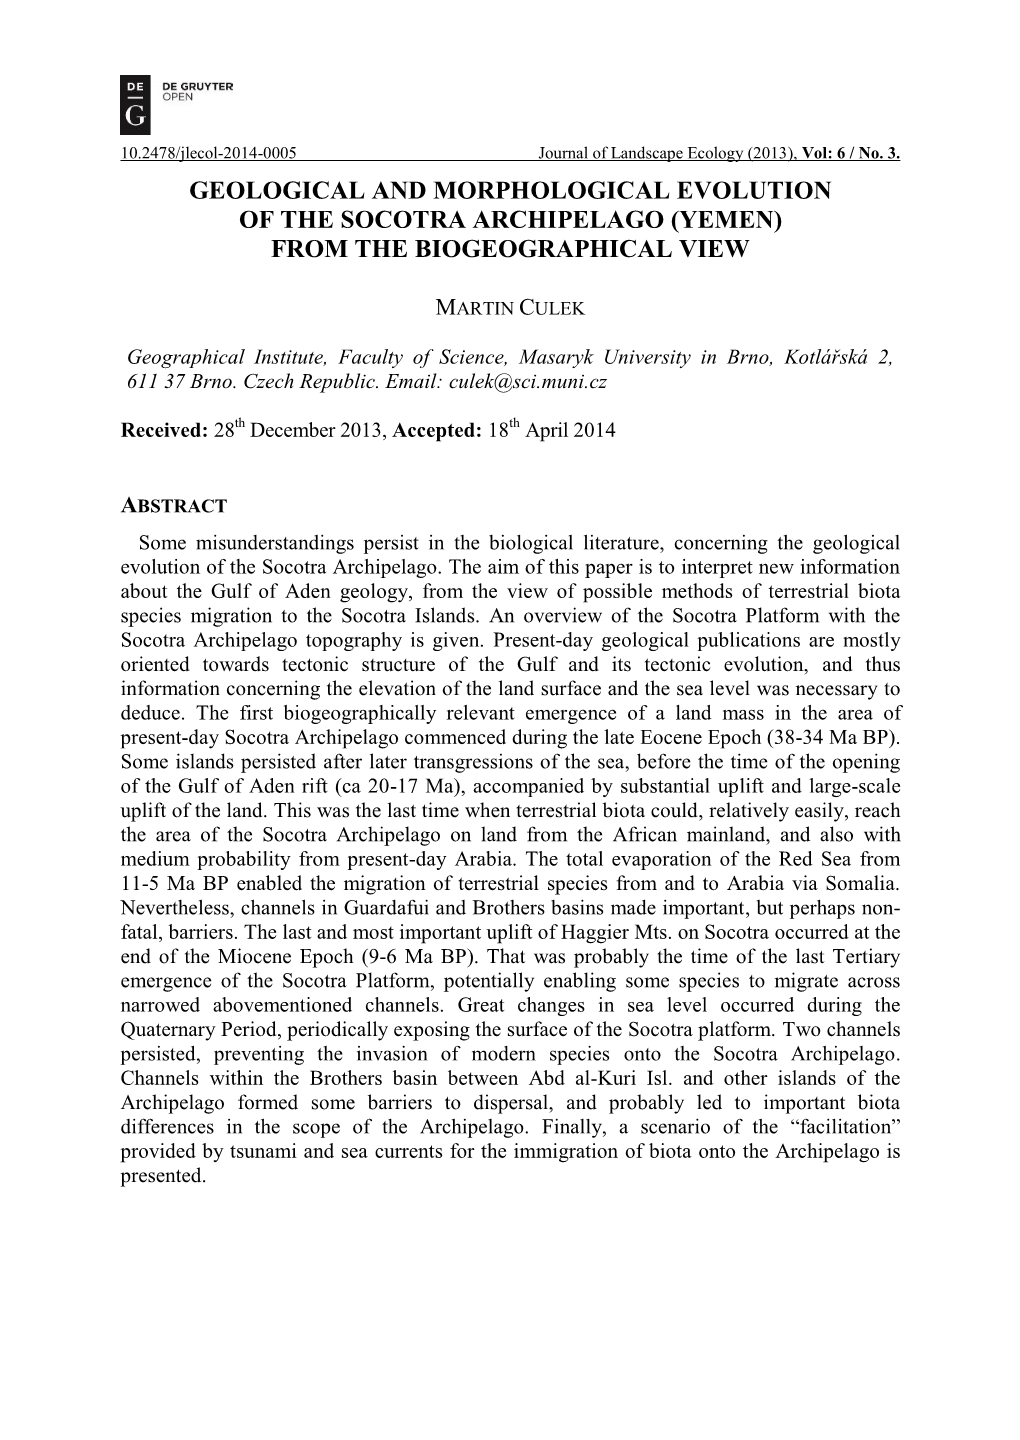 Geological and Morphological Evolution of the Socotra Archipelago (Yemen) from the Biogeographical View